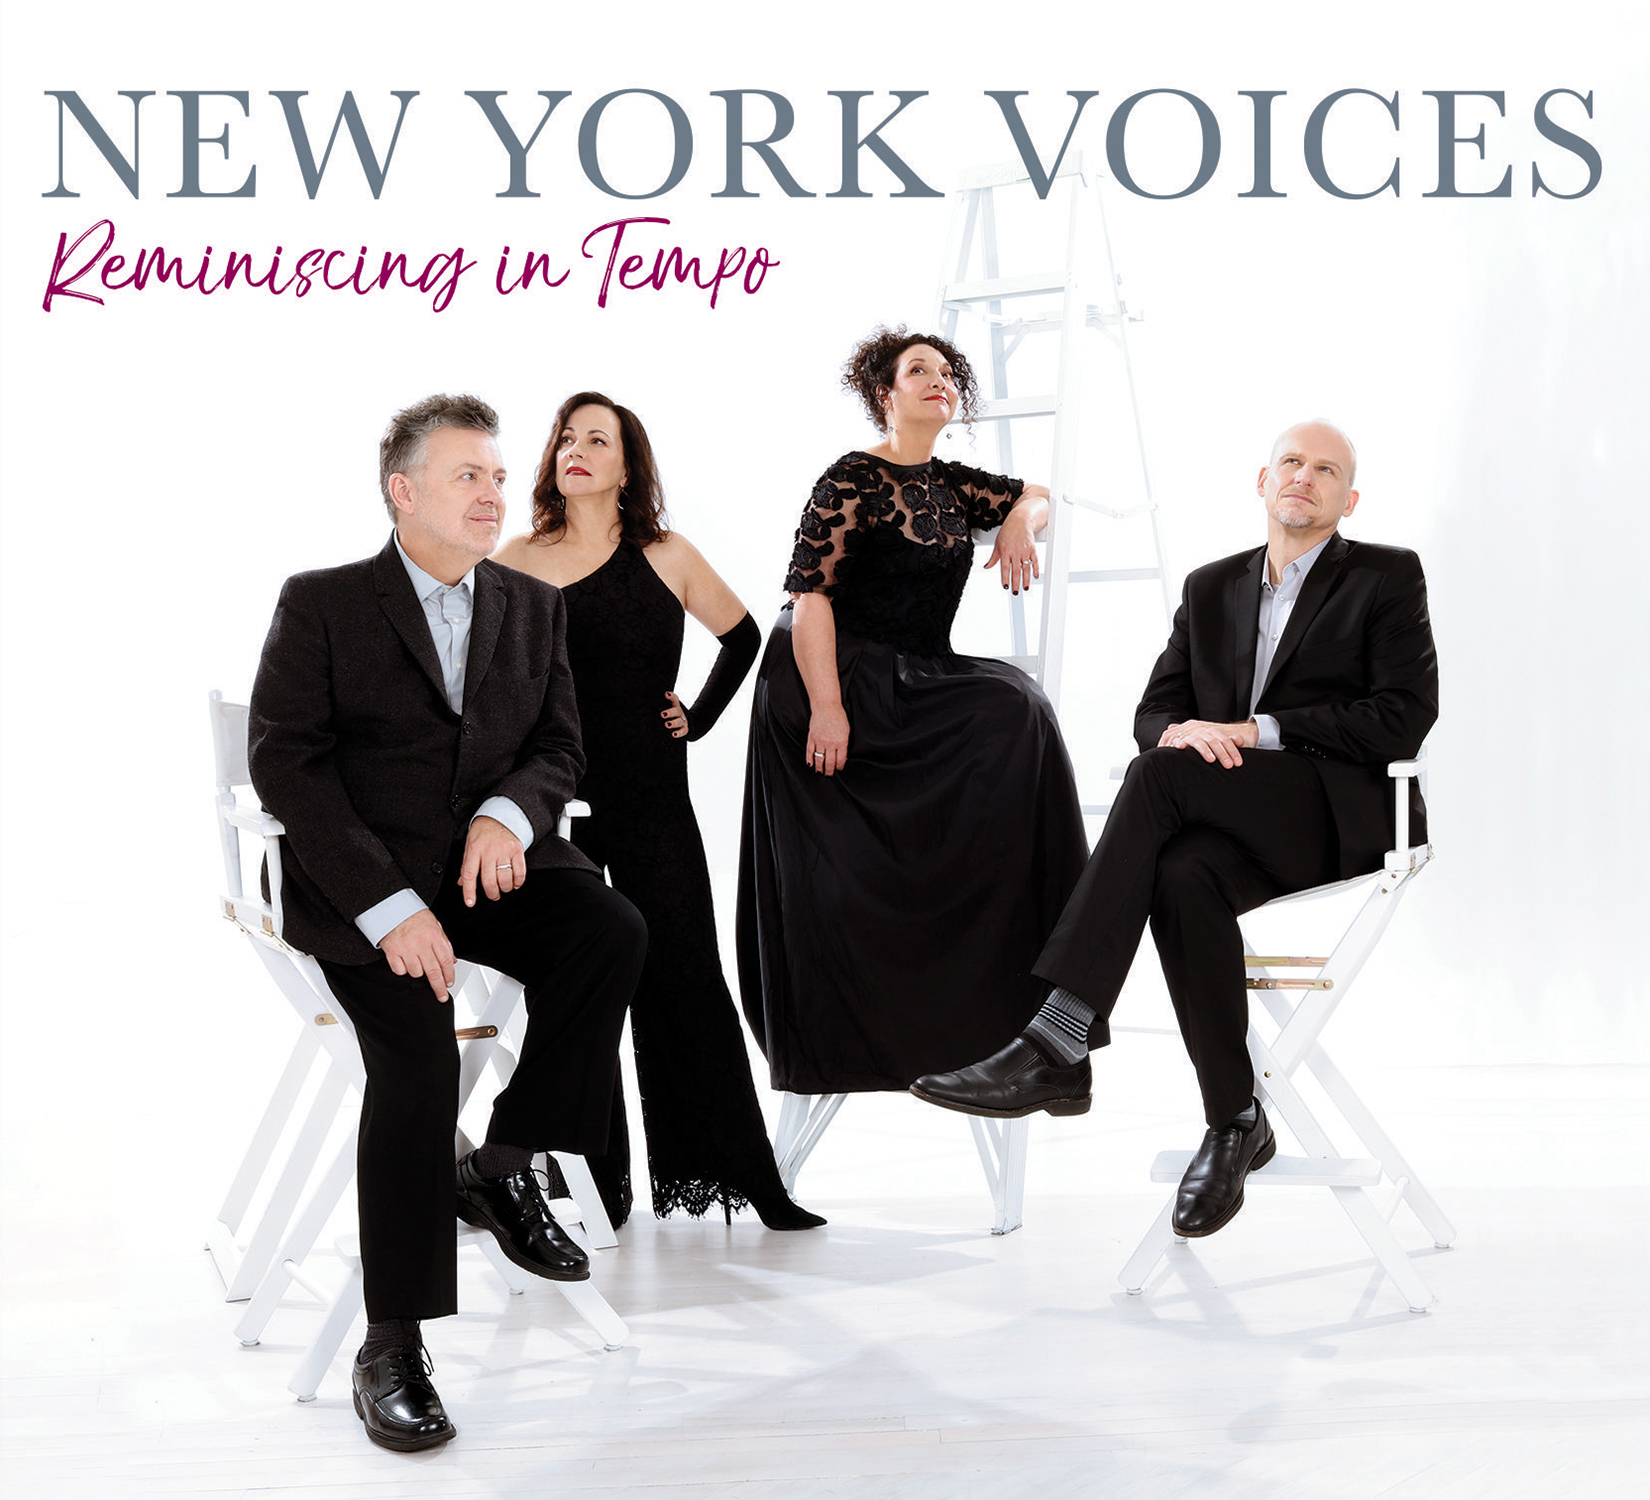 You are currently viewing Reminiscing in Tempo / New York Voices